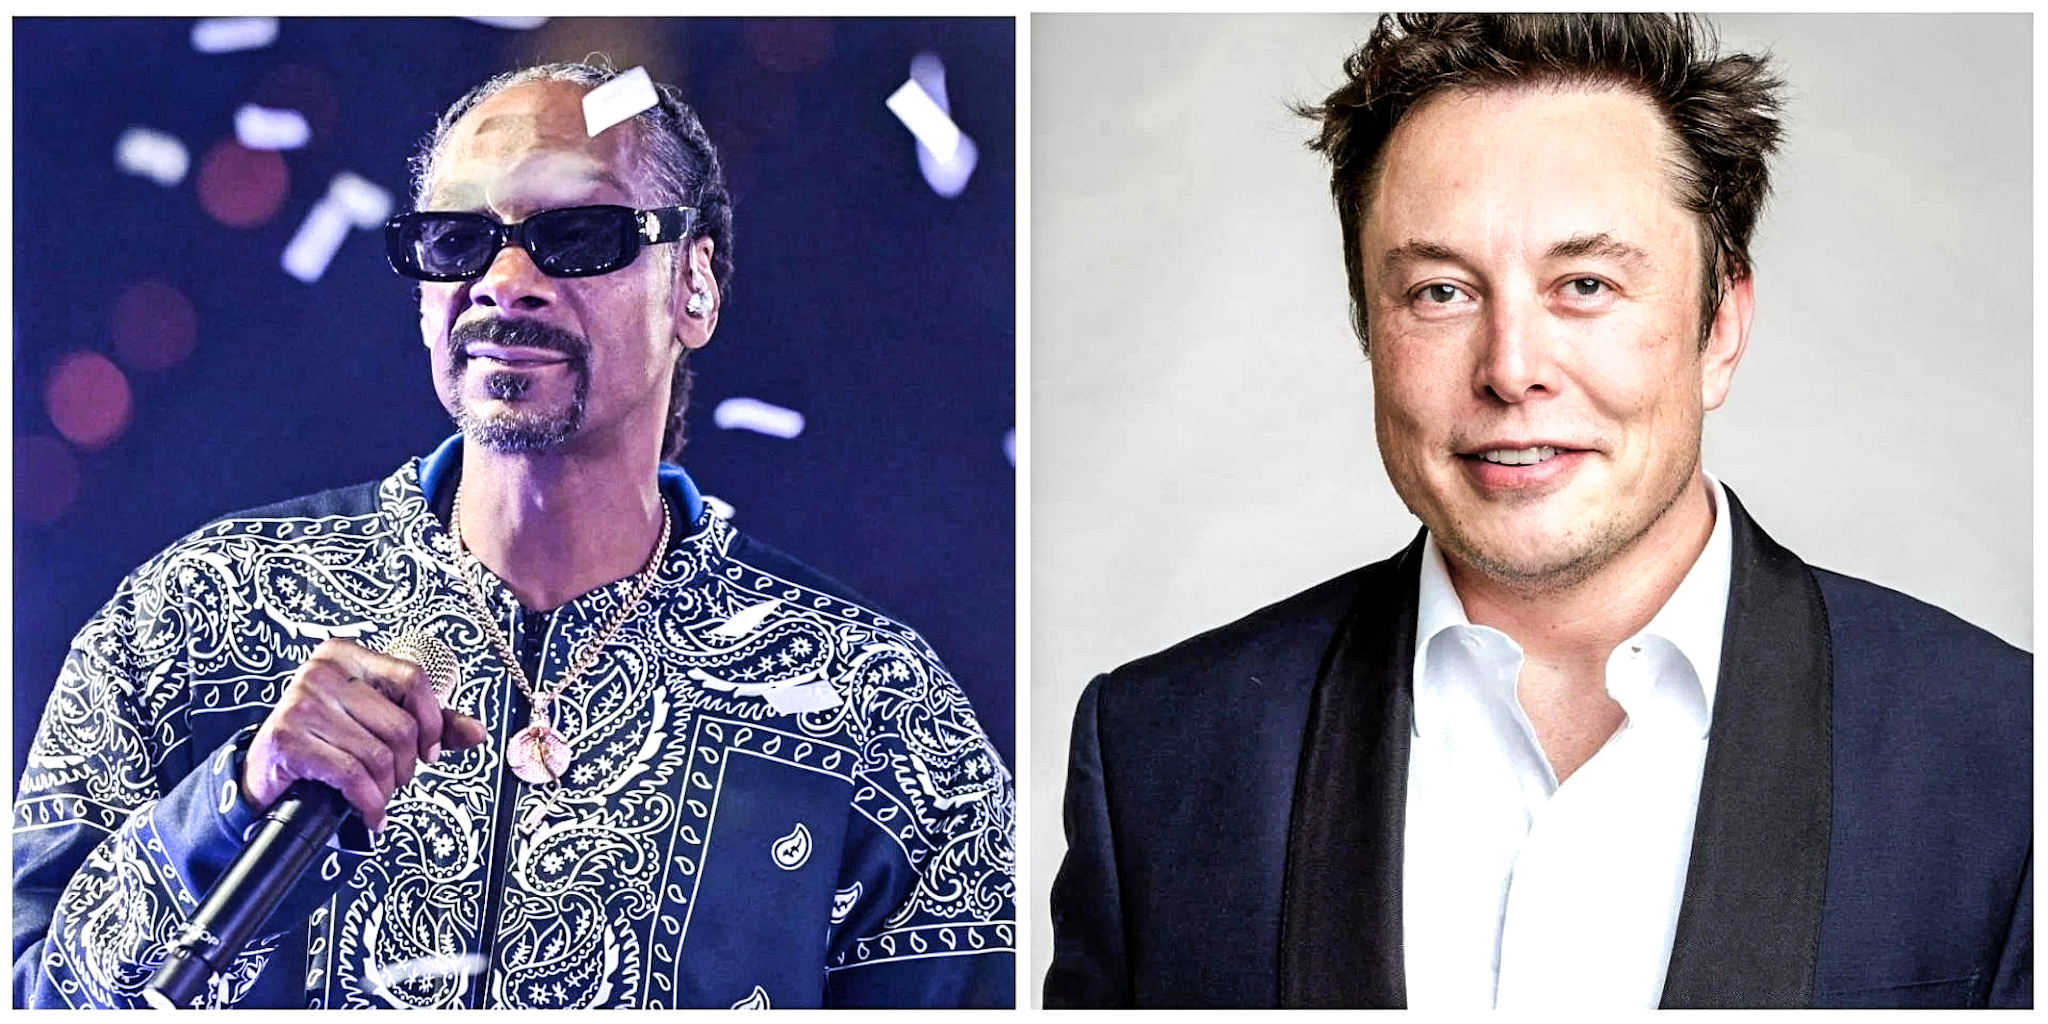 Nearly one million vote for Snoop Dogg to run Twitter after he mimics Musk poll